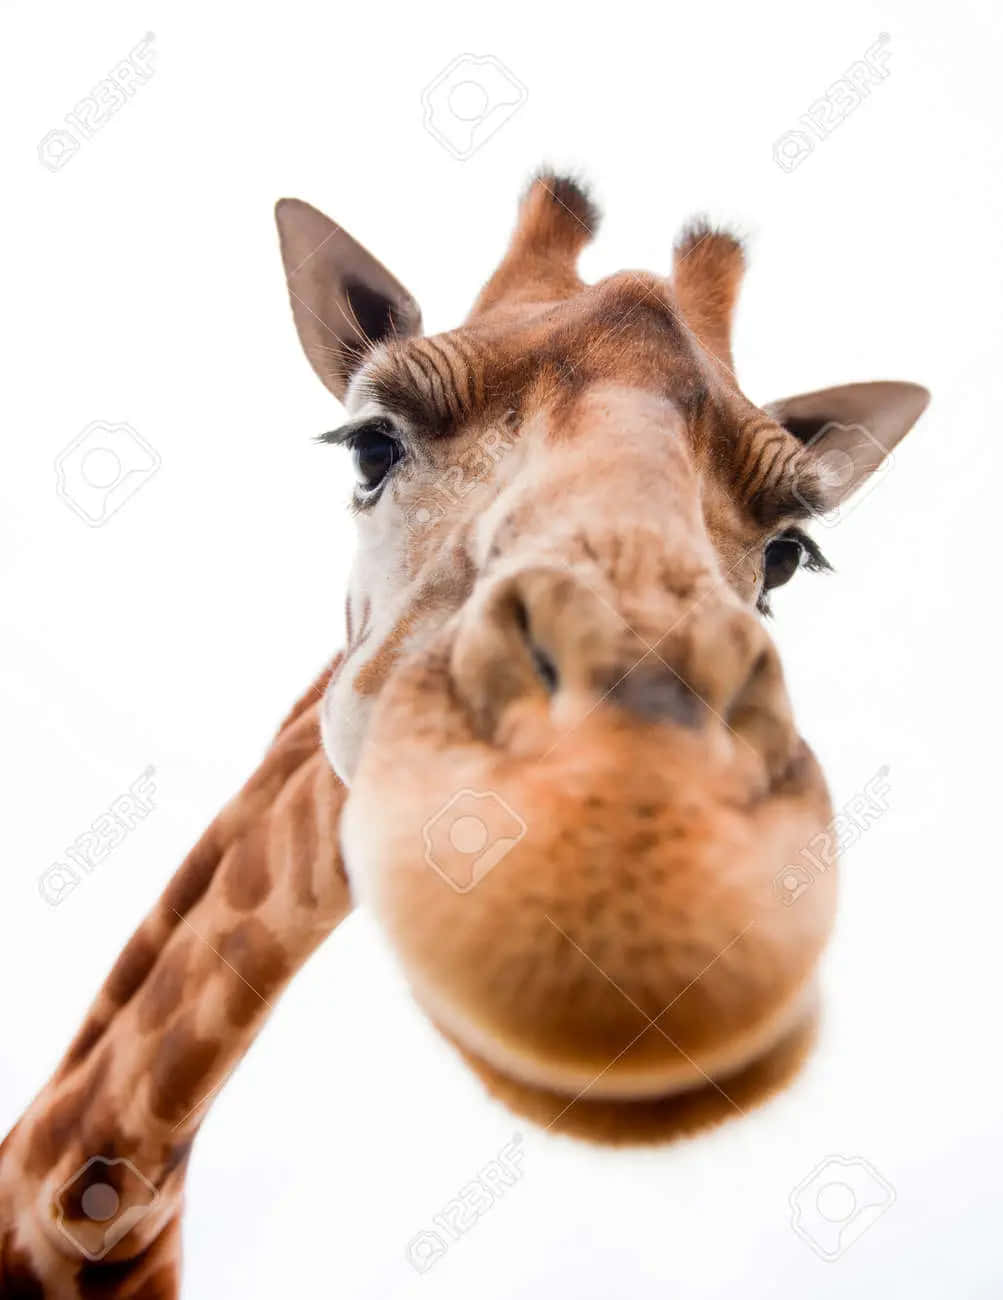 A silly, smiling giraffe looking for a friend!